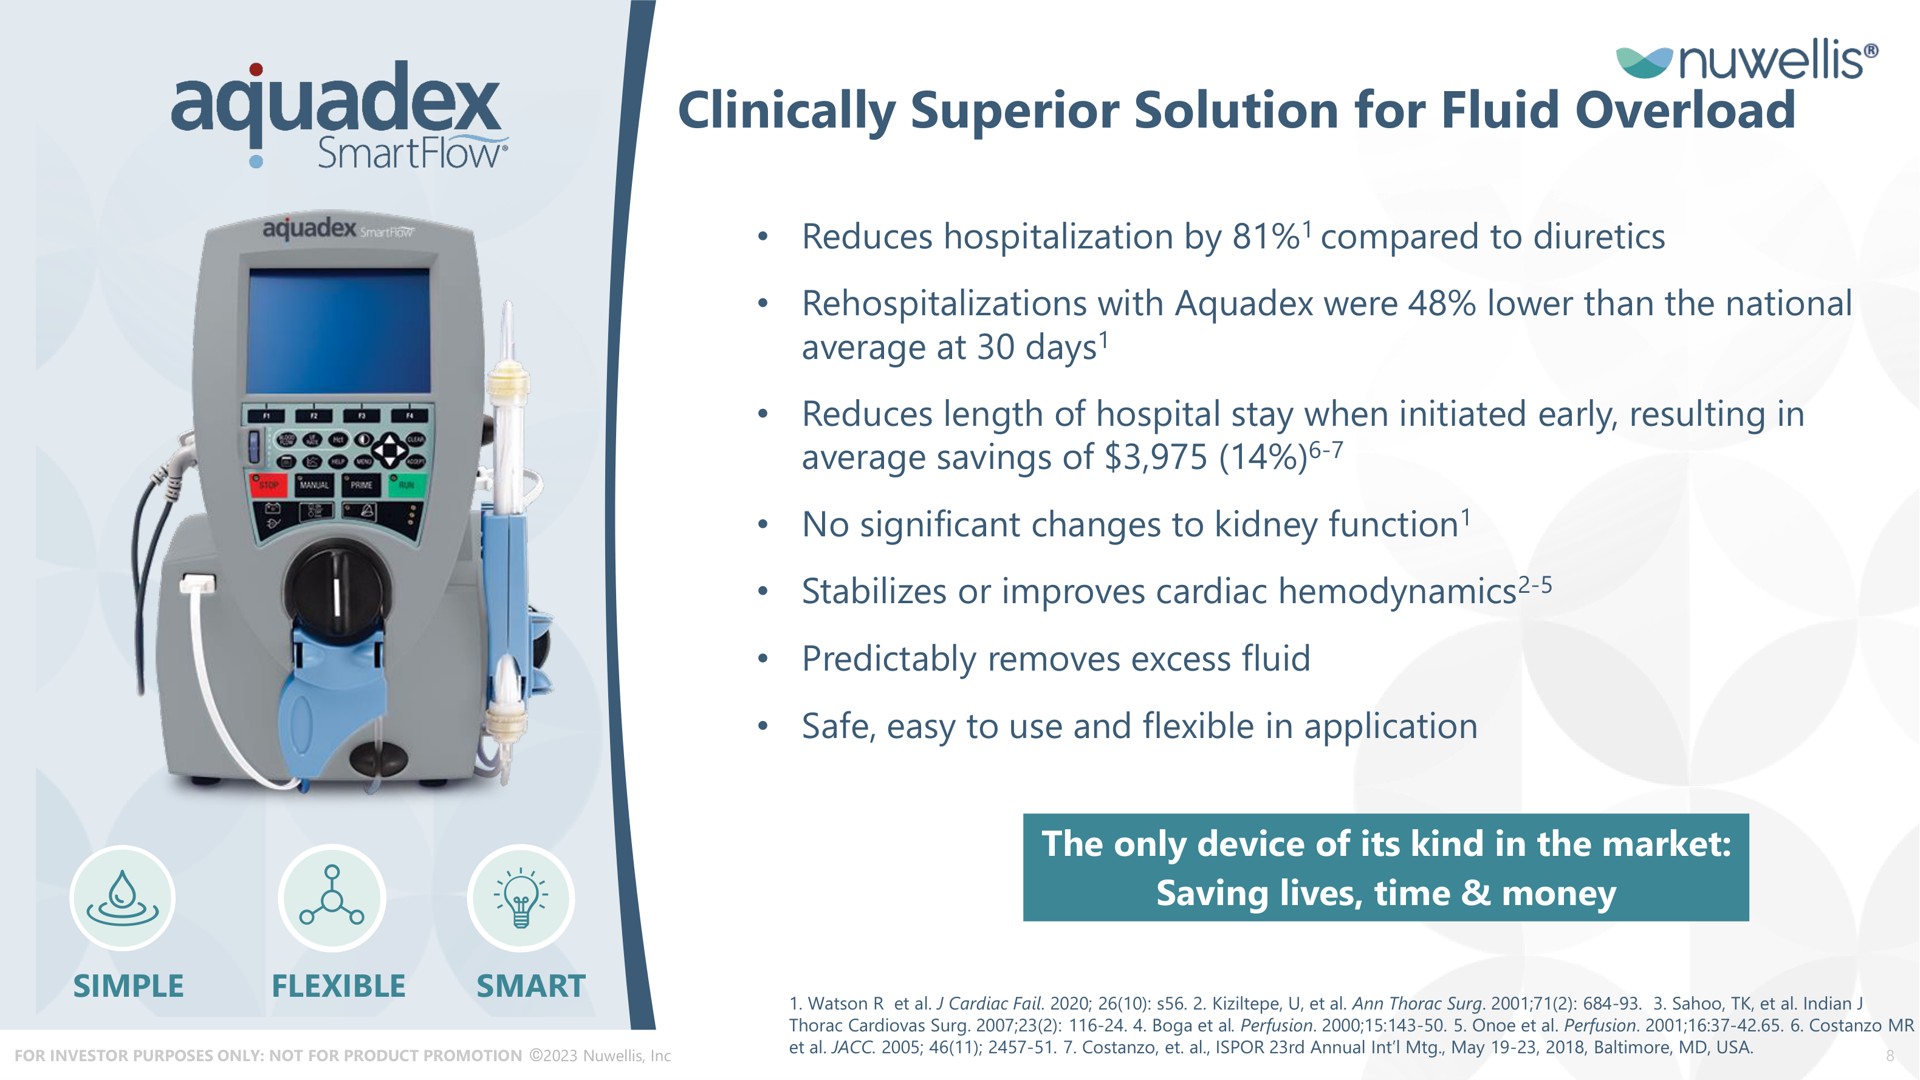 clinically superior solution for fluid overload | Nuwellis